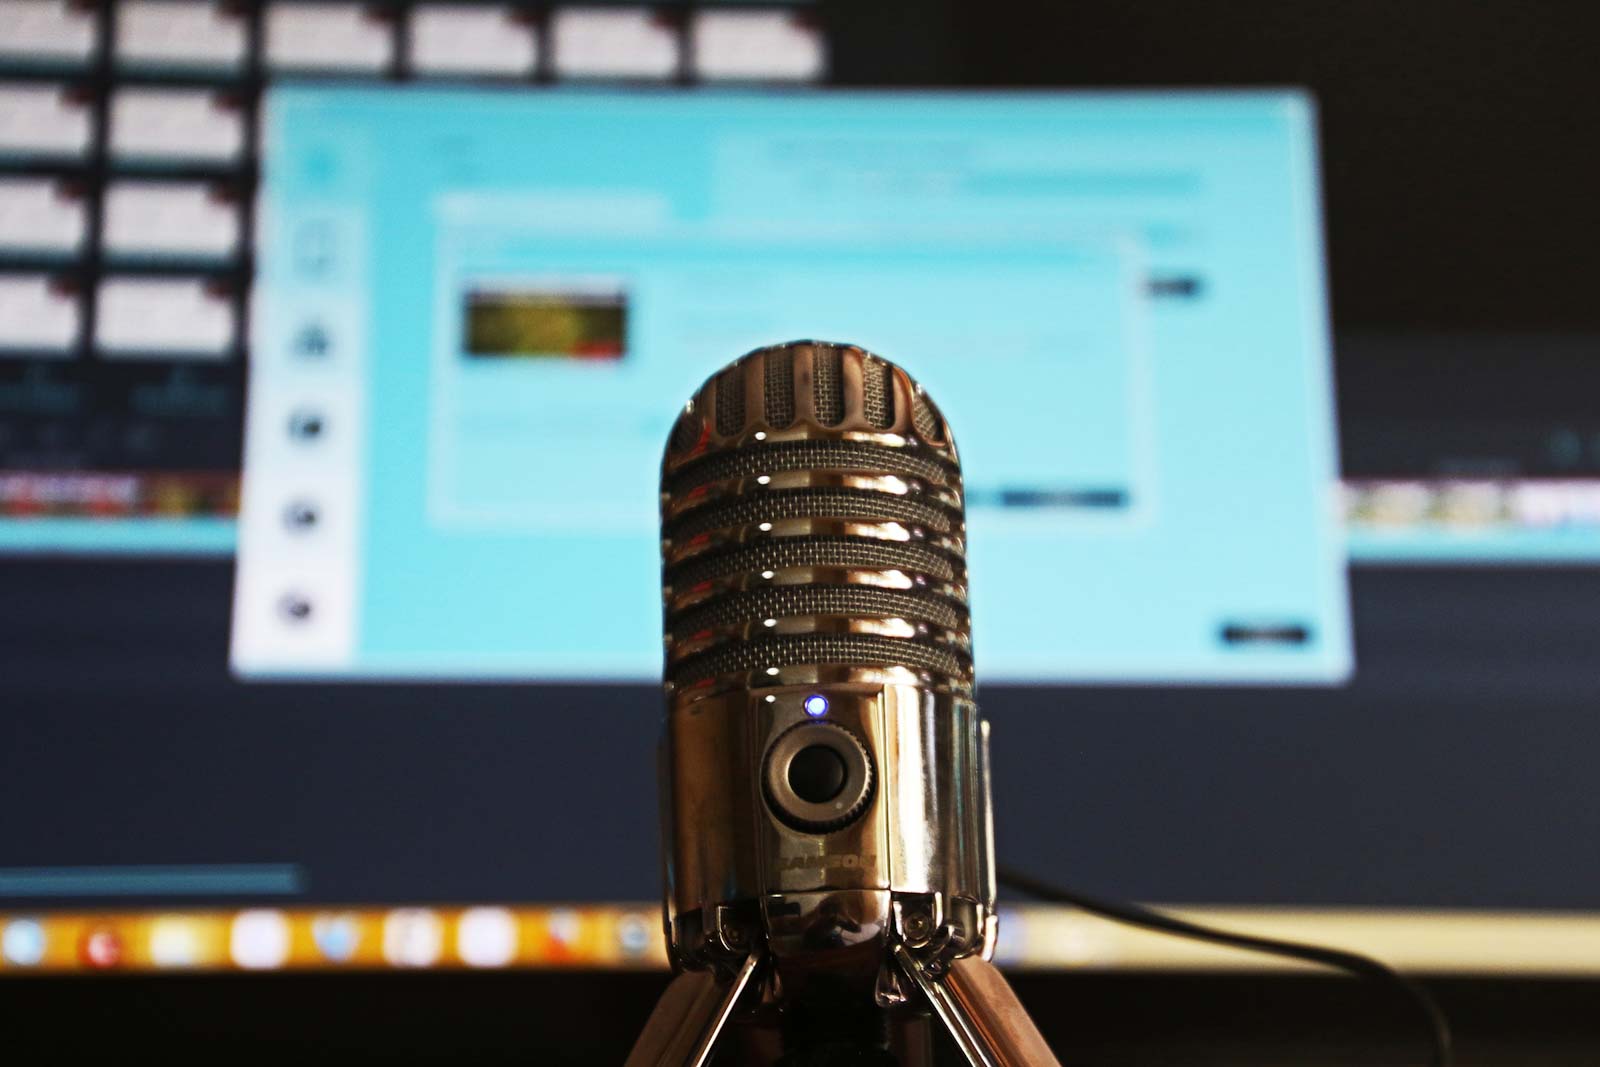 desktop microphone in close up, in front of a large computer screen